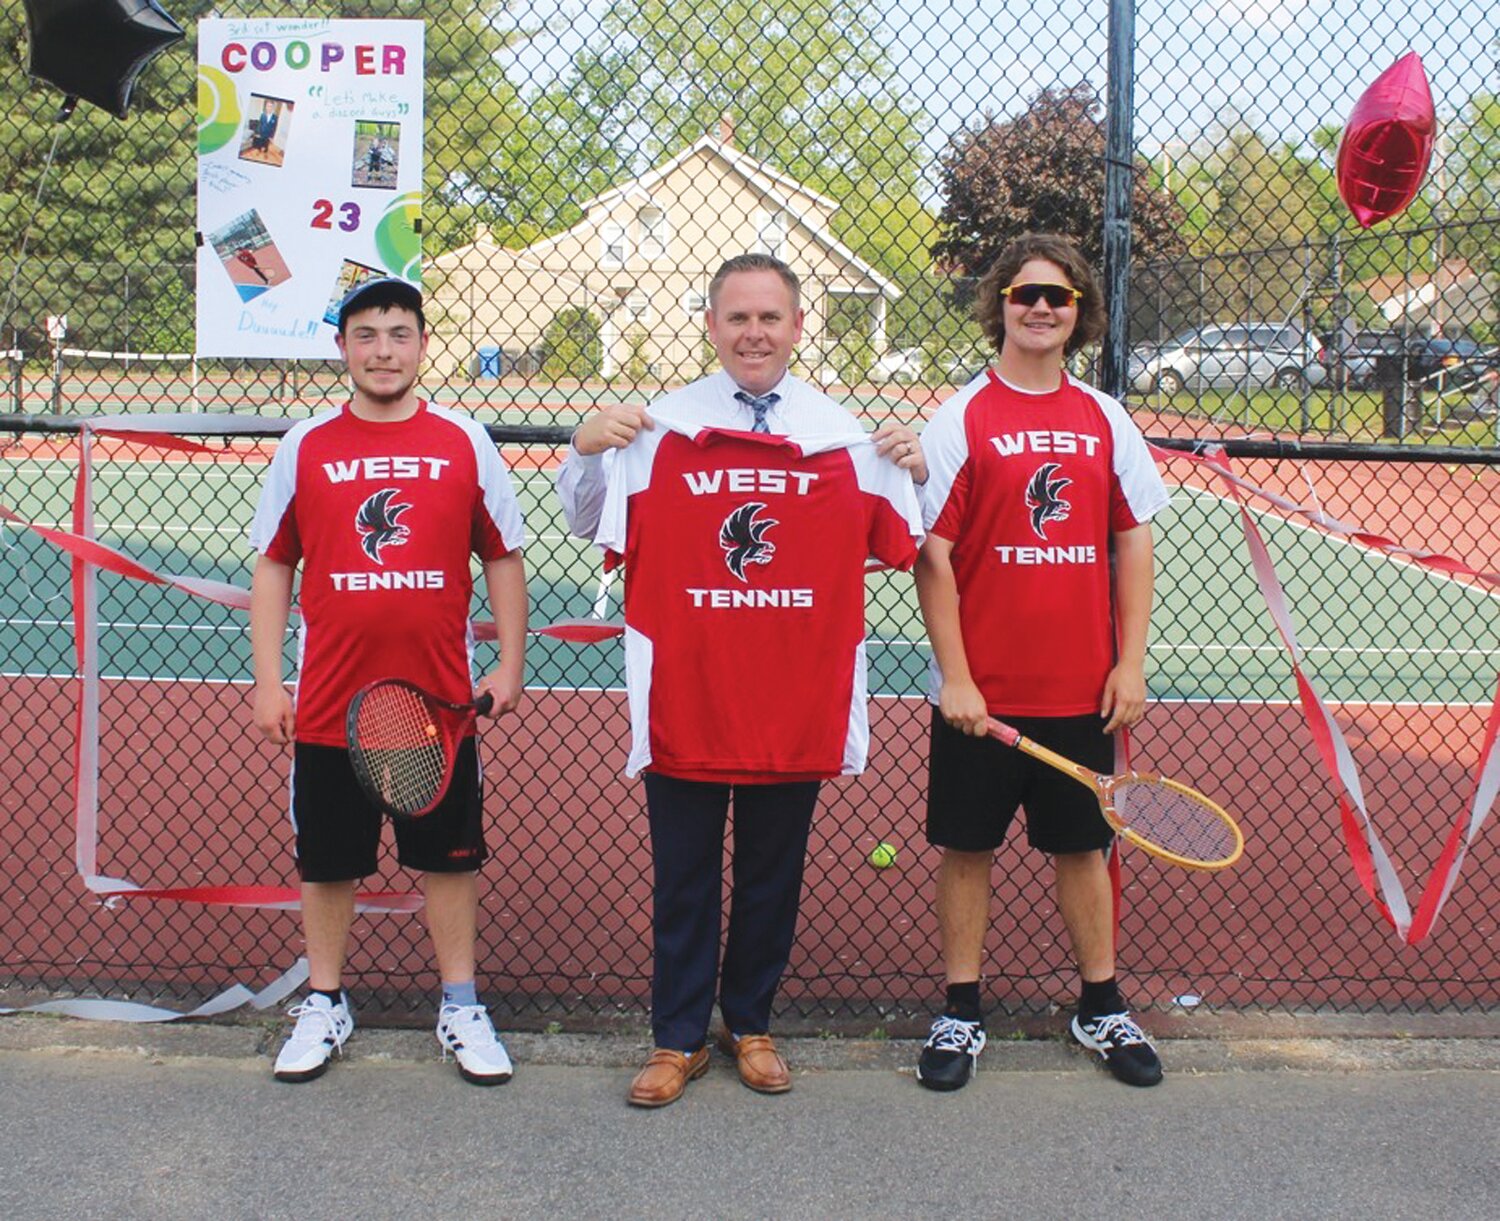 SENIOR CELEBRATION: Cranston West tennis senior captains Cooper Goodwin (left) and Liam McCormack (right) are joined by principal John Fontaine during the team’s Senior Night celebration. (Photos by Alex Sponseller)